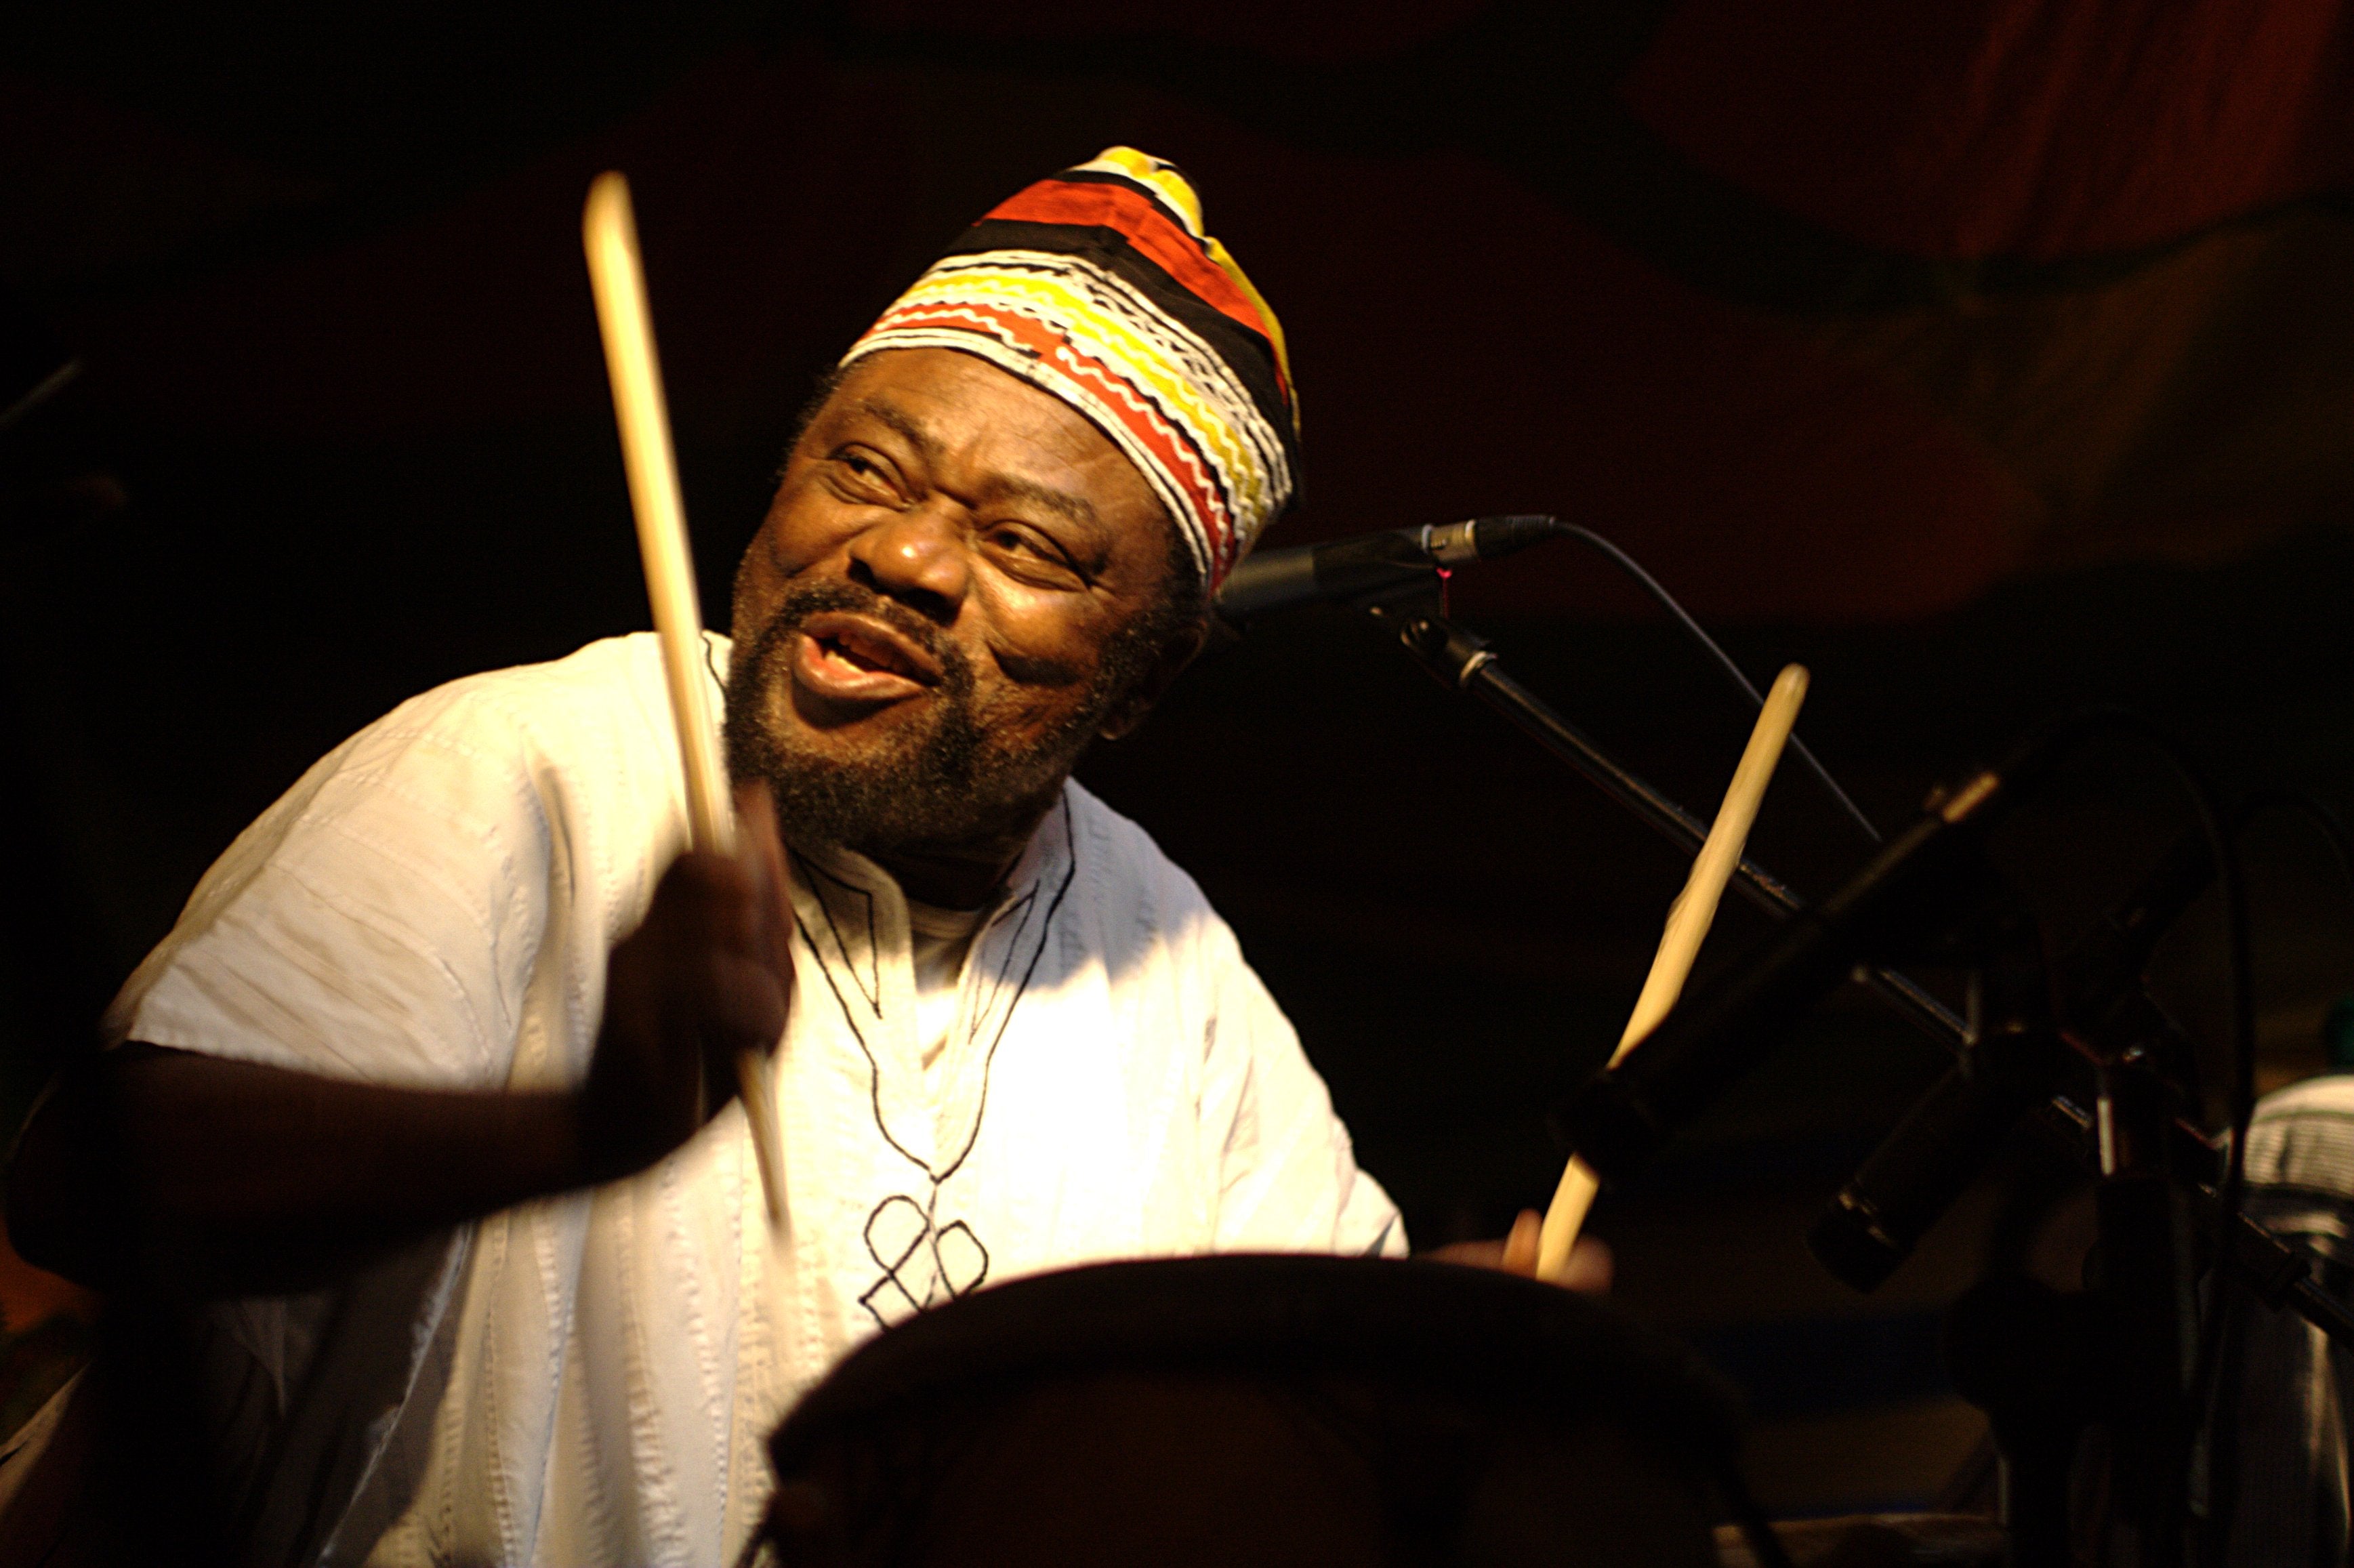 Ossibisa by David Wilson Clarke, [Licensed under Creative Commons](https://creativecommons.org/licenses/by-nc-nd/2.0/).